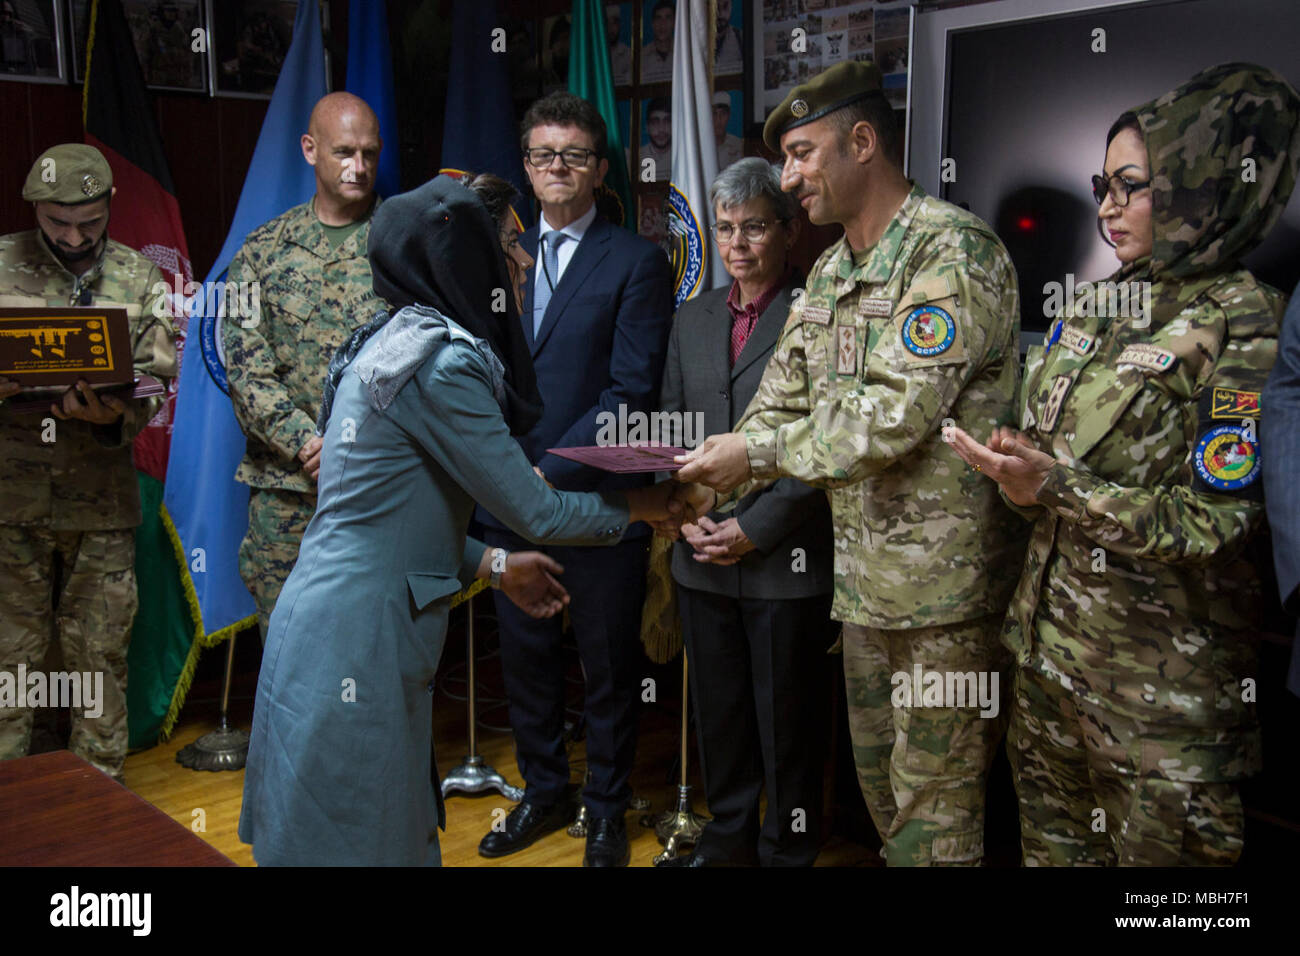 Afghan Lt. Col. M. Khetab Khangari, First General Command of Police Special Units commander, presents a certificate to a Female Foundation Course graduate as Australian Ambassador to Afghanistan Nicola Gordon-Smith and Norwegian Deputy Ambassador to Afghanistan John Almster look on at the Special Police Training Center, Camp Wak, Kabul, Afghanistan, Apr. 5, 2018. Stock Photo